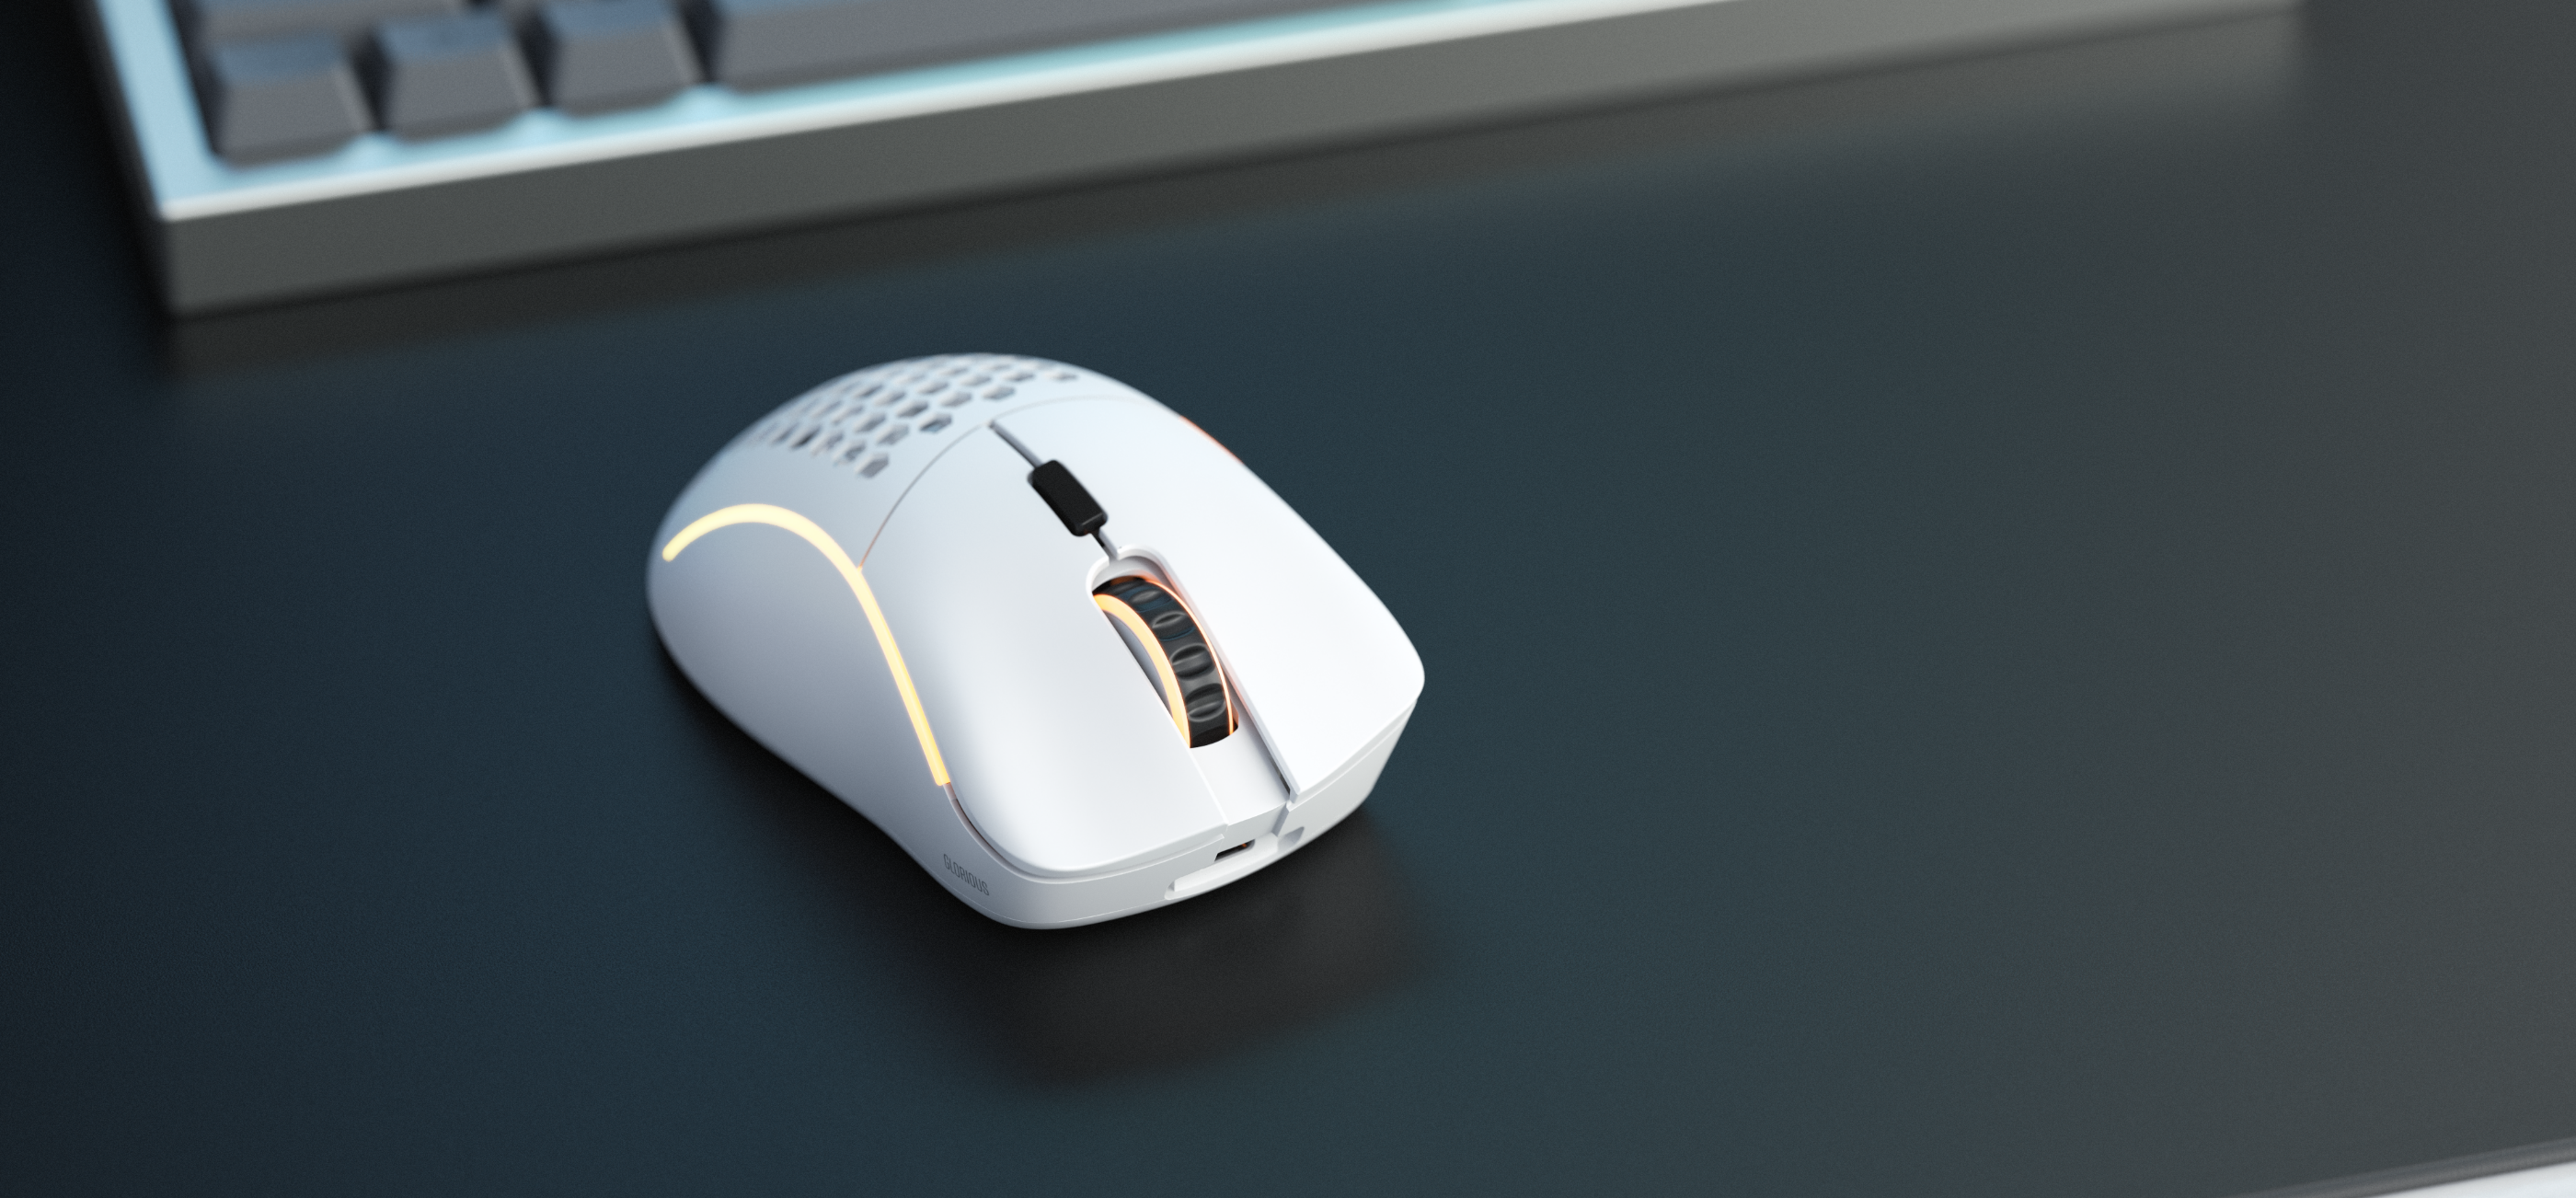 A large marketing image providing additional information about the product Glorious Model D Minus Ergonomic Wireless Gaming Mouse - Matte White - Additional alt info not provided